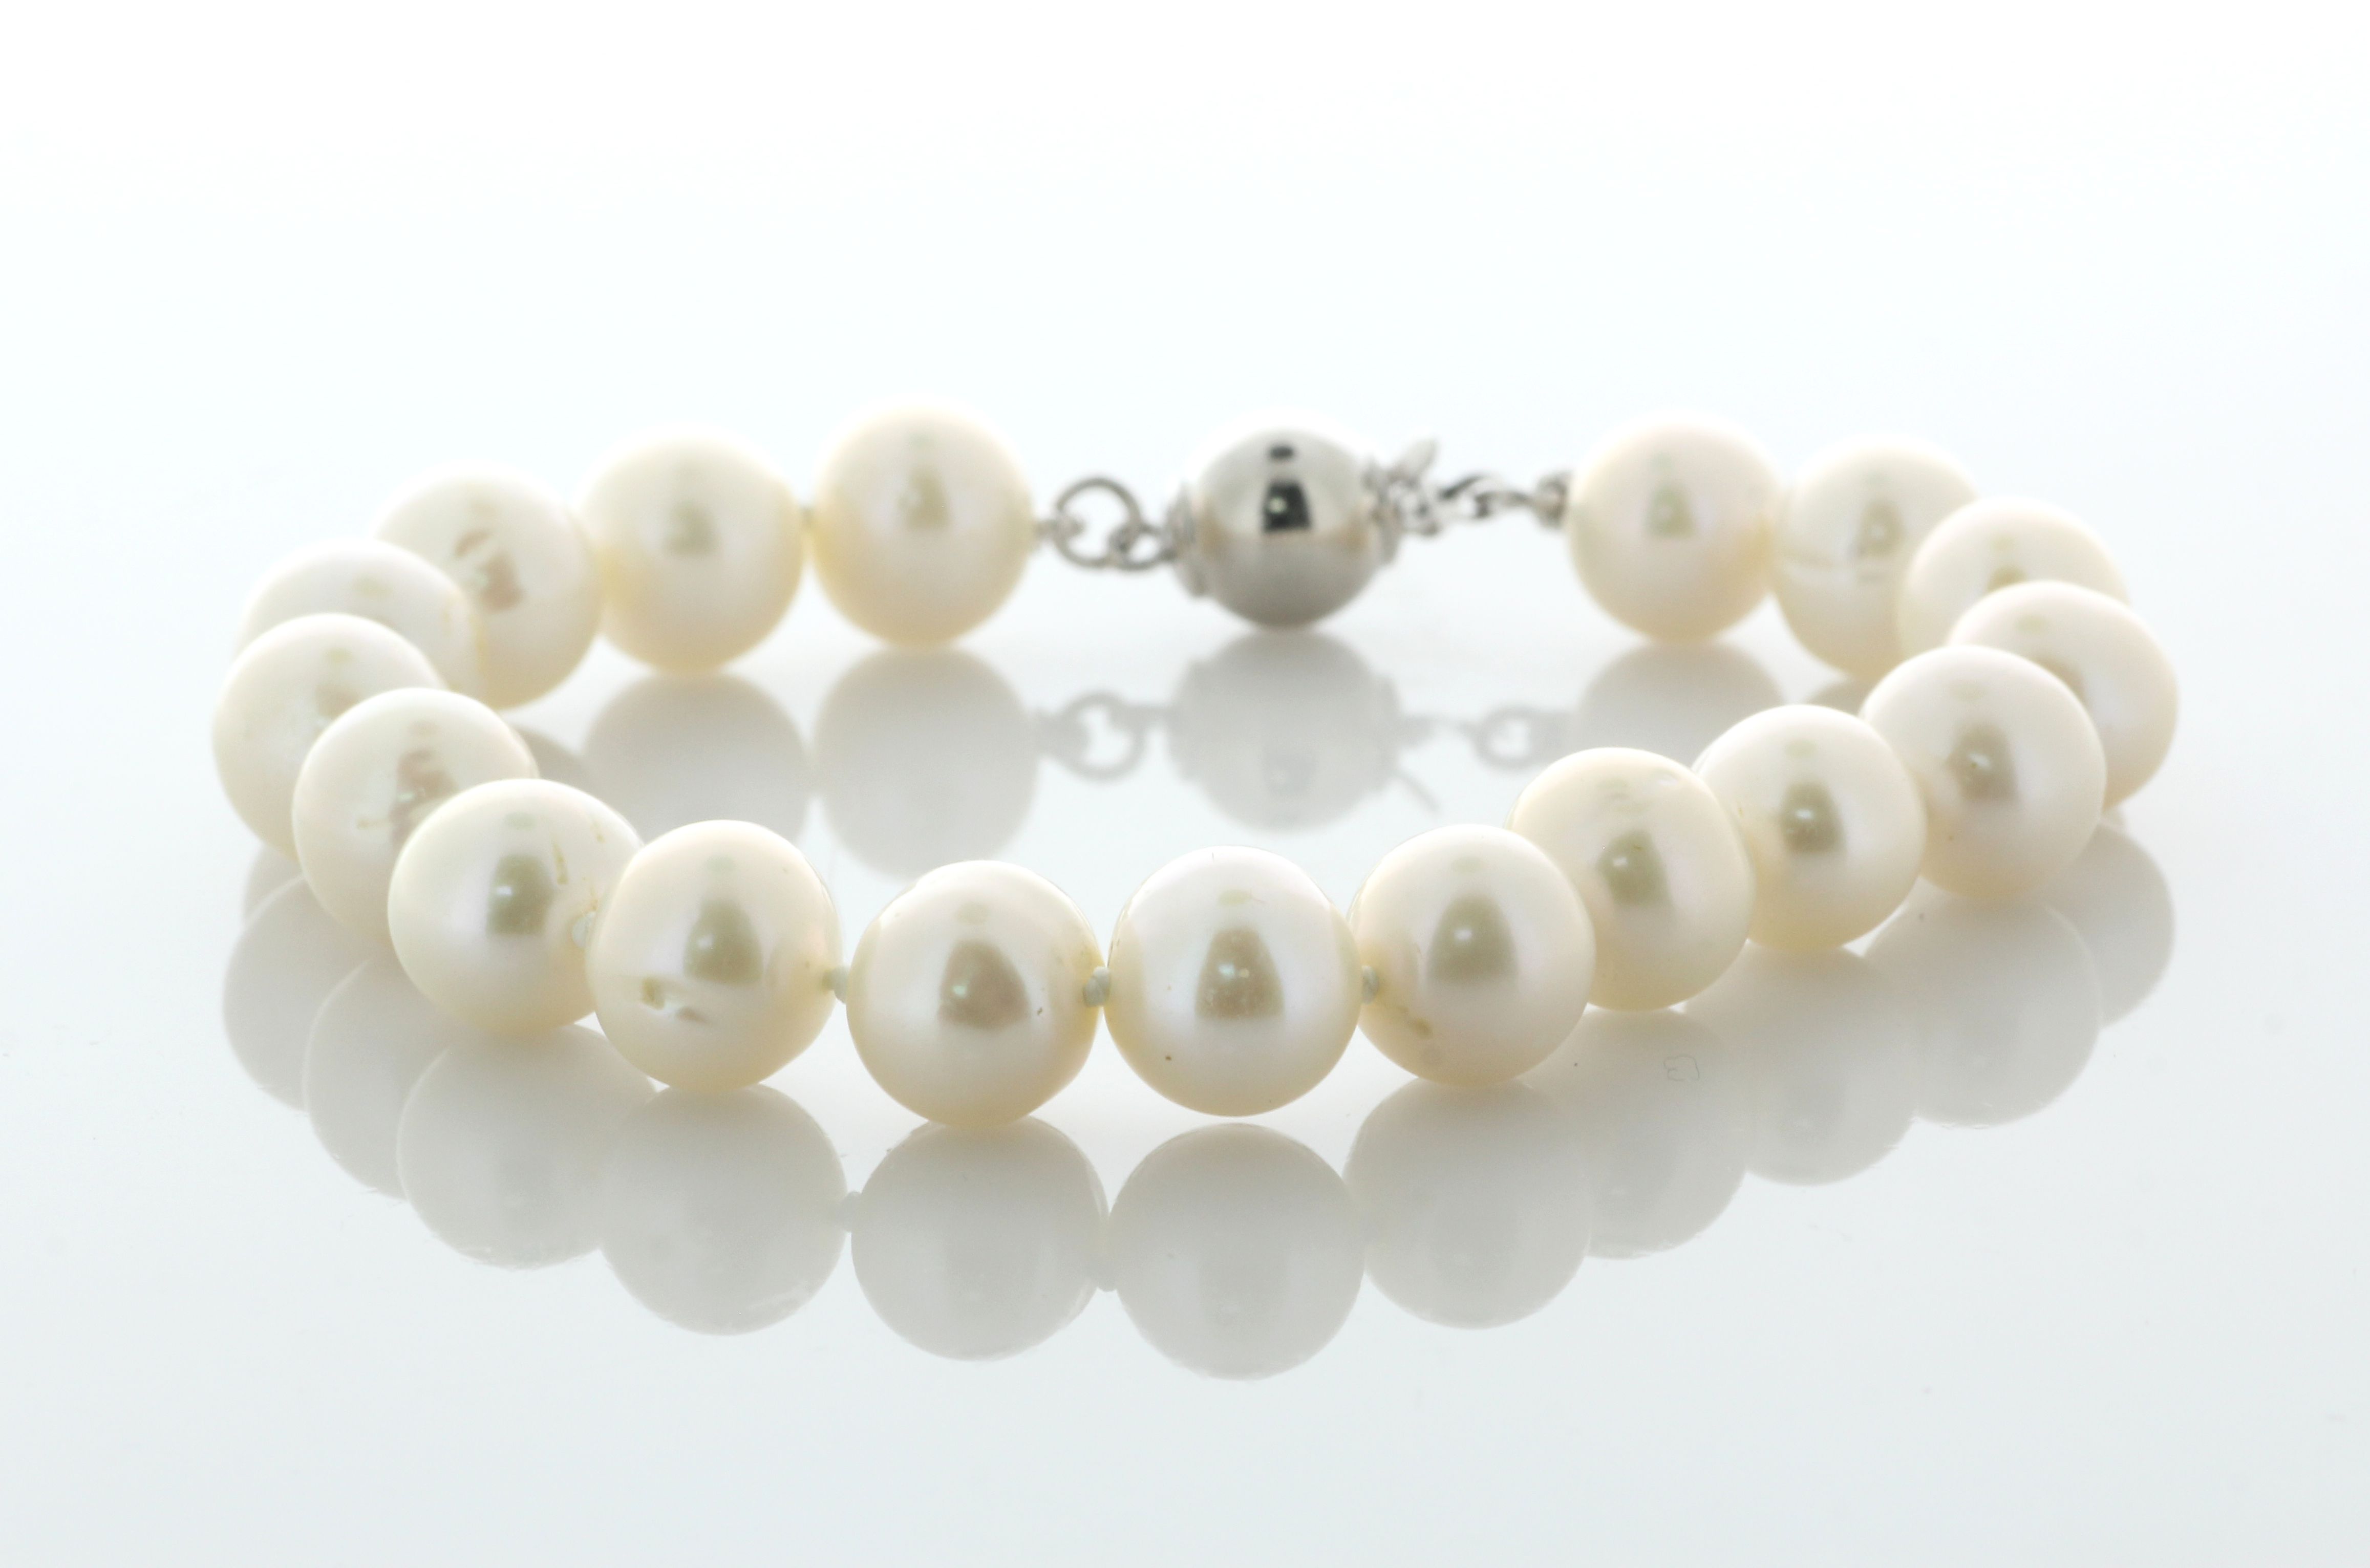 6.5 Inches Freshwater Cultured 8.5 - 9.0mm Pearl Bracelet With Silver Clasp